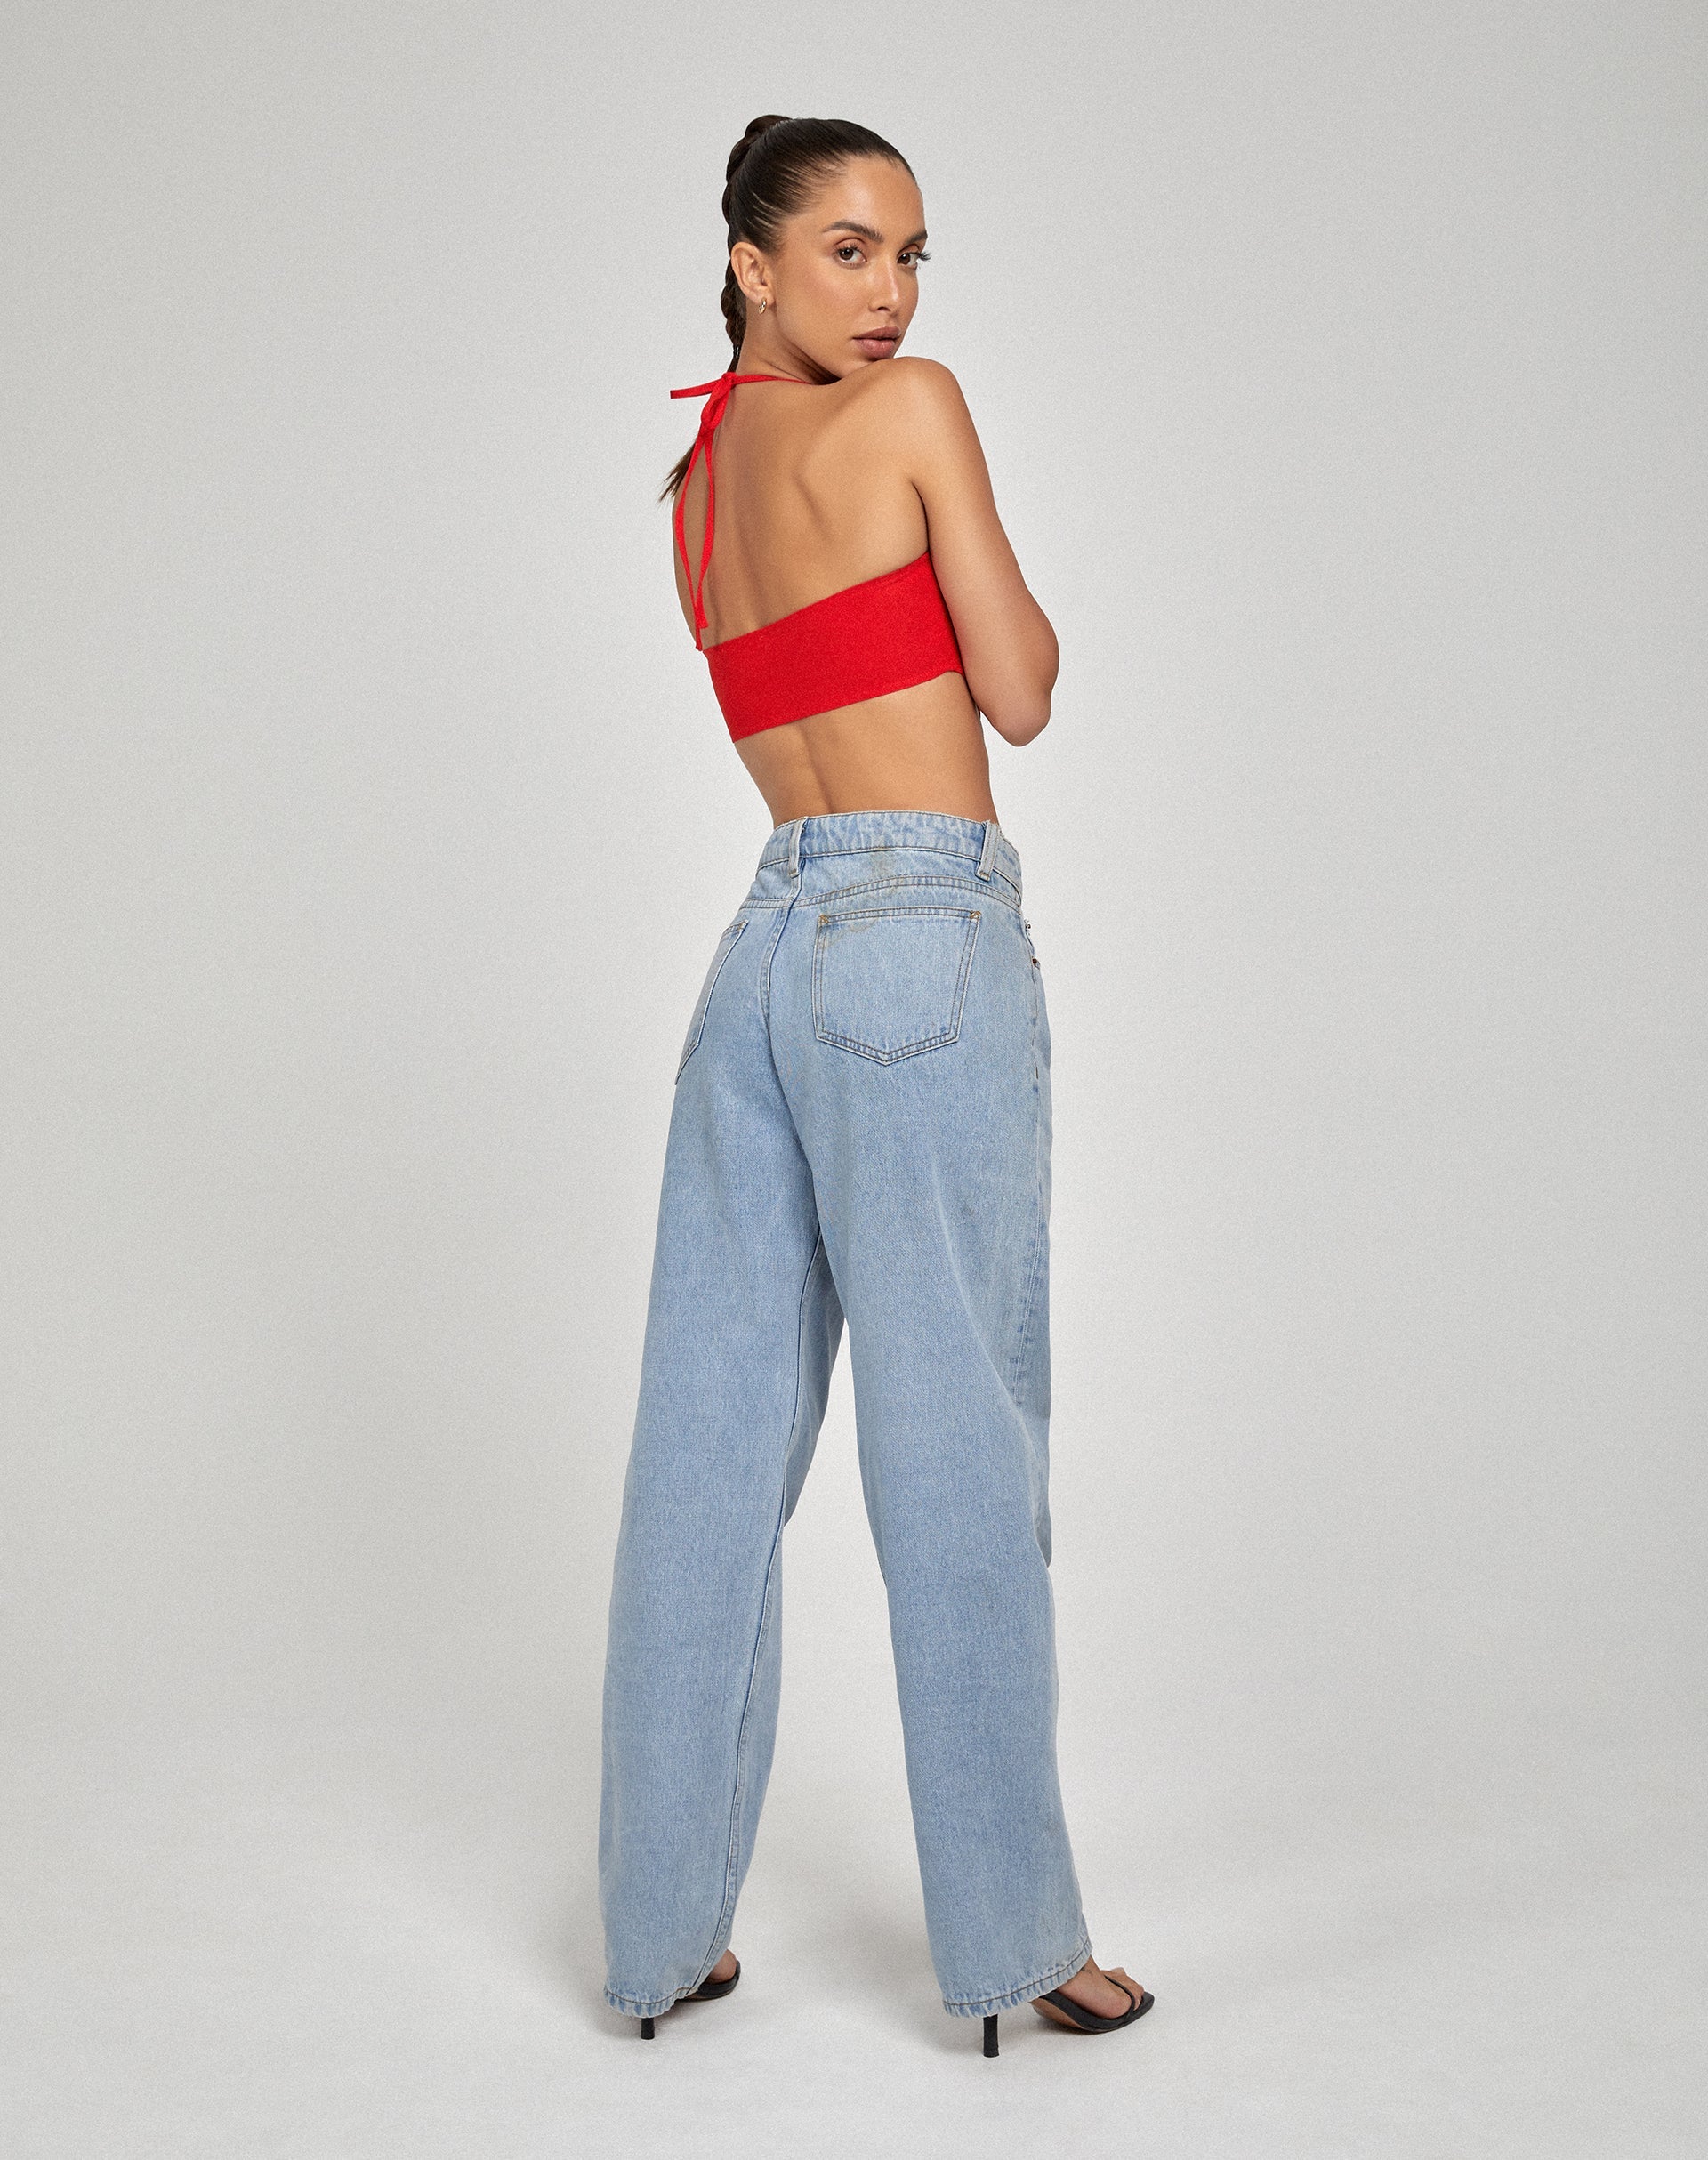 Taina Crop Top in Tailoring Red